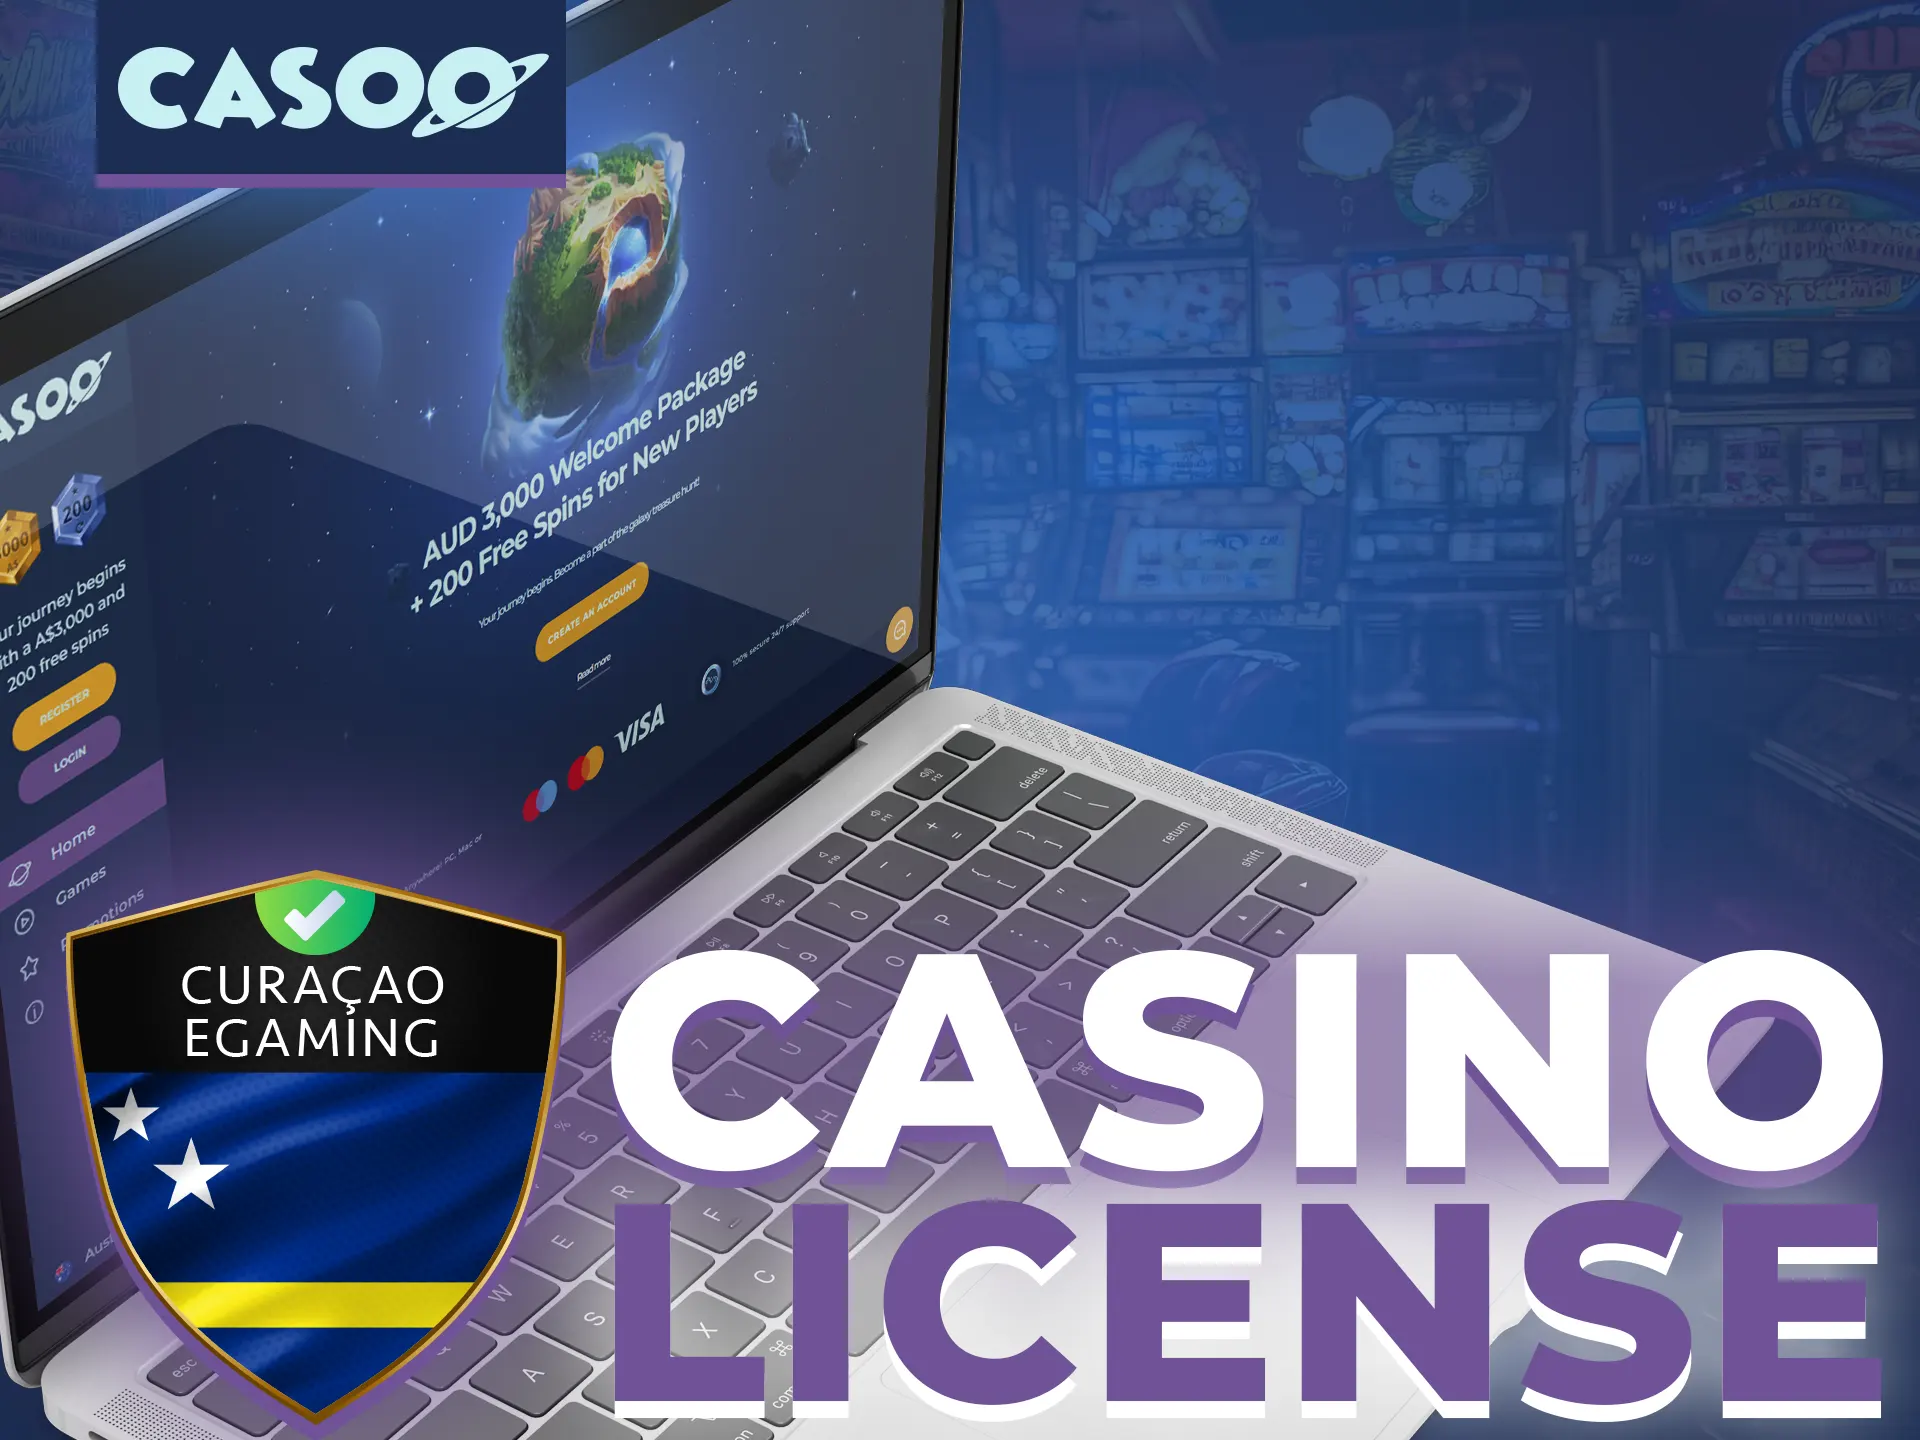 Casoo casino is licensed and legal gambling website.